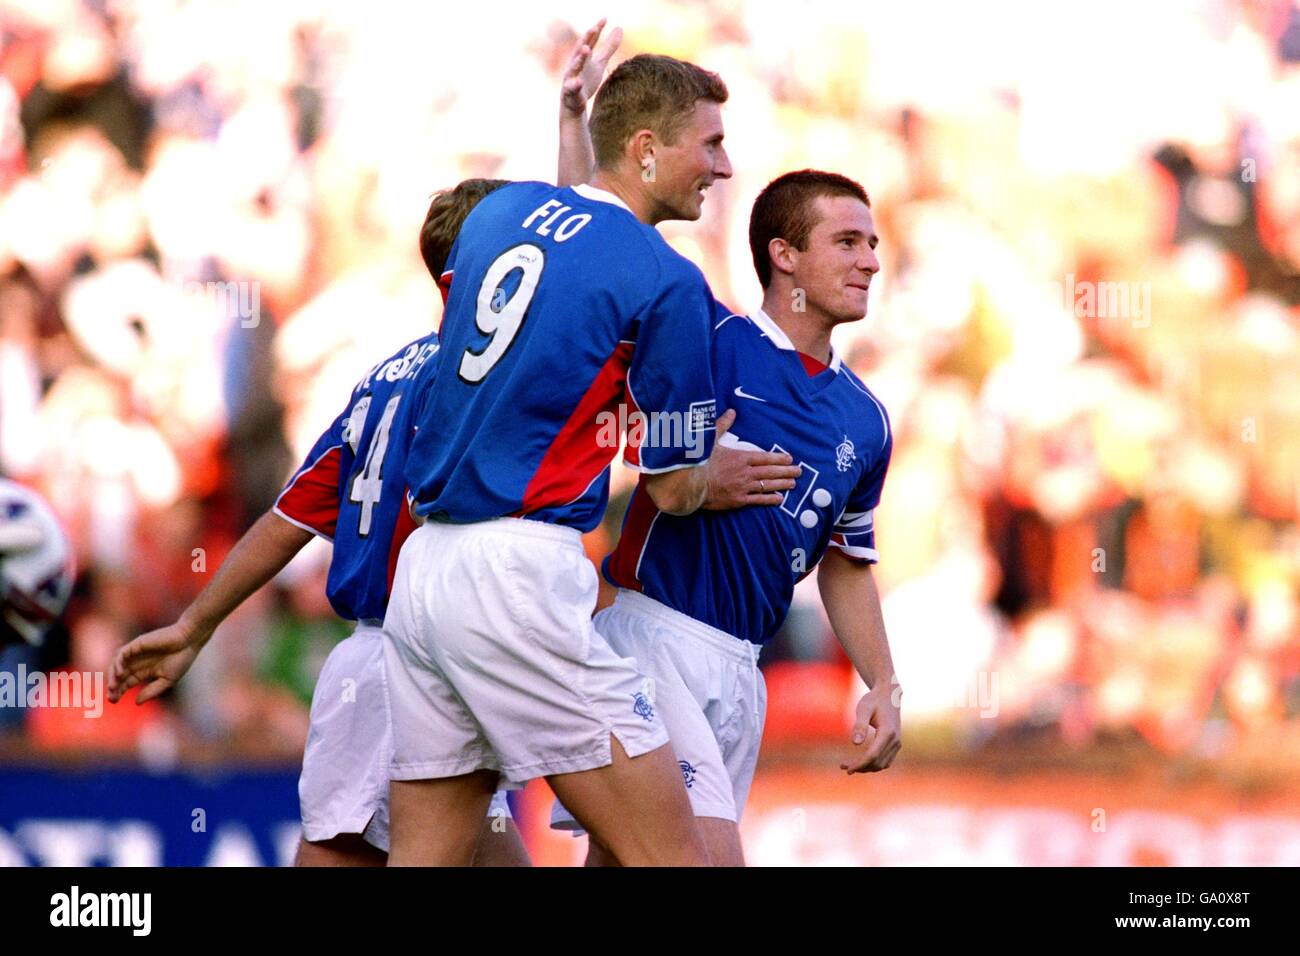 Scottish Soccer - Scottish Premiership - Dundee United v Rangers. Rangers' Tore Andre Flo (l) is congratulated by teammate Barry Ferguson (r) Stock Photo